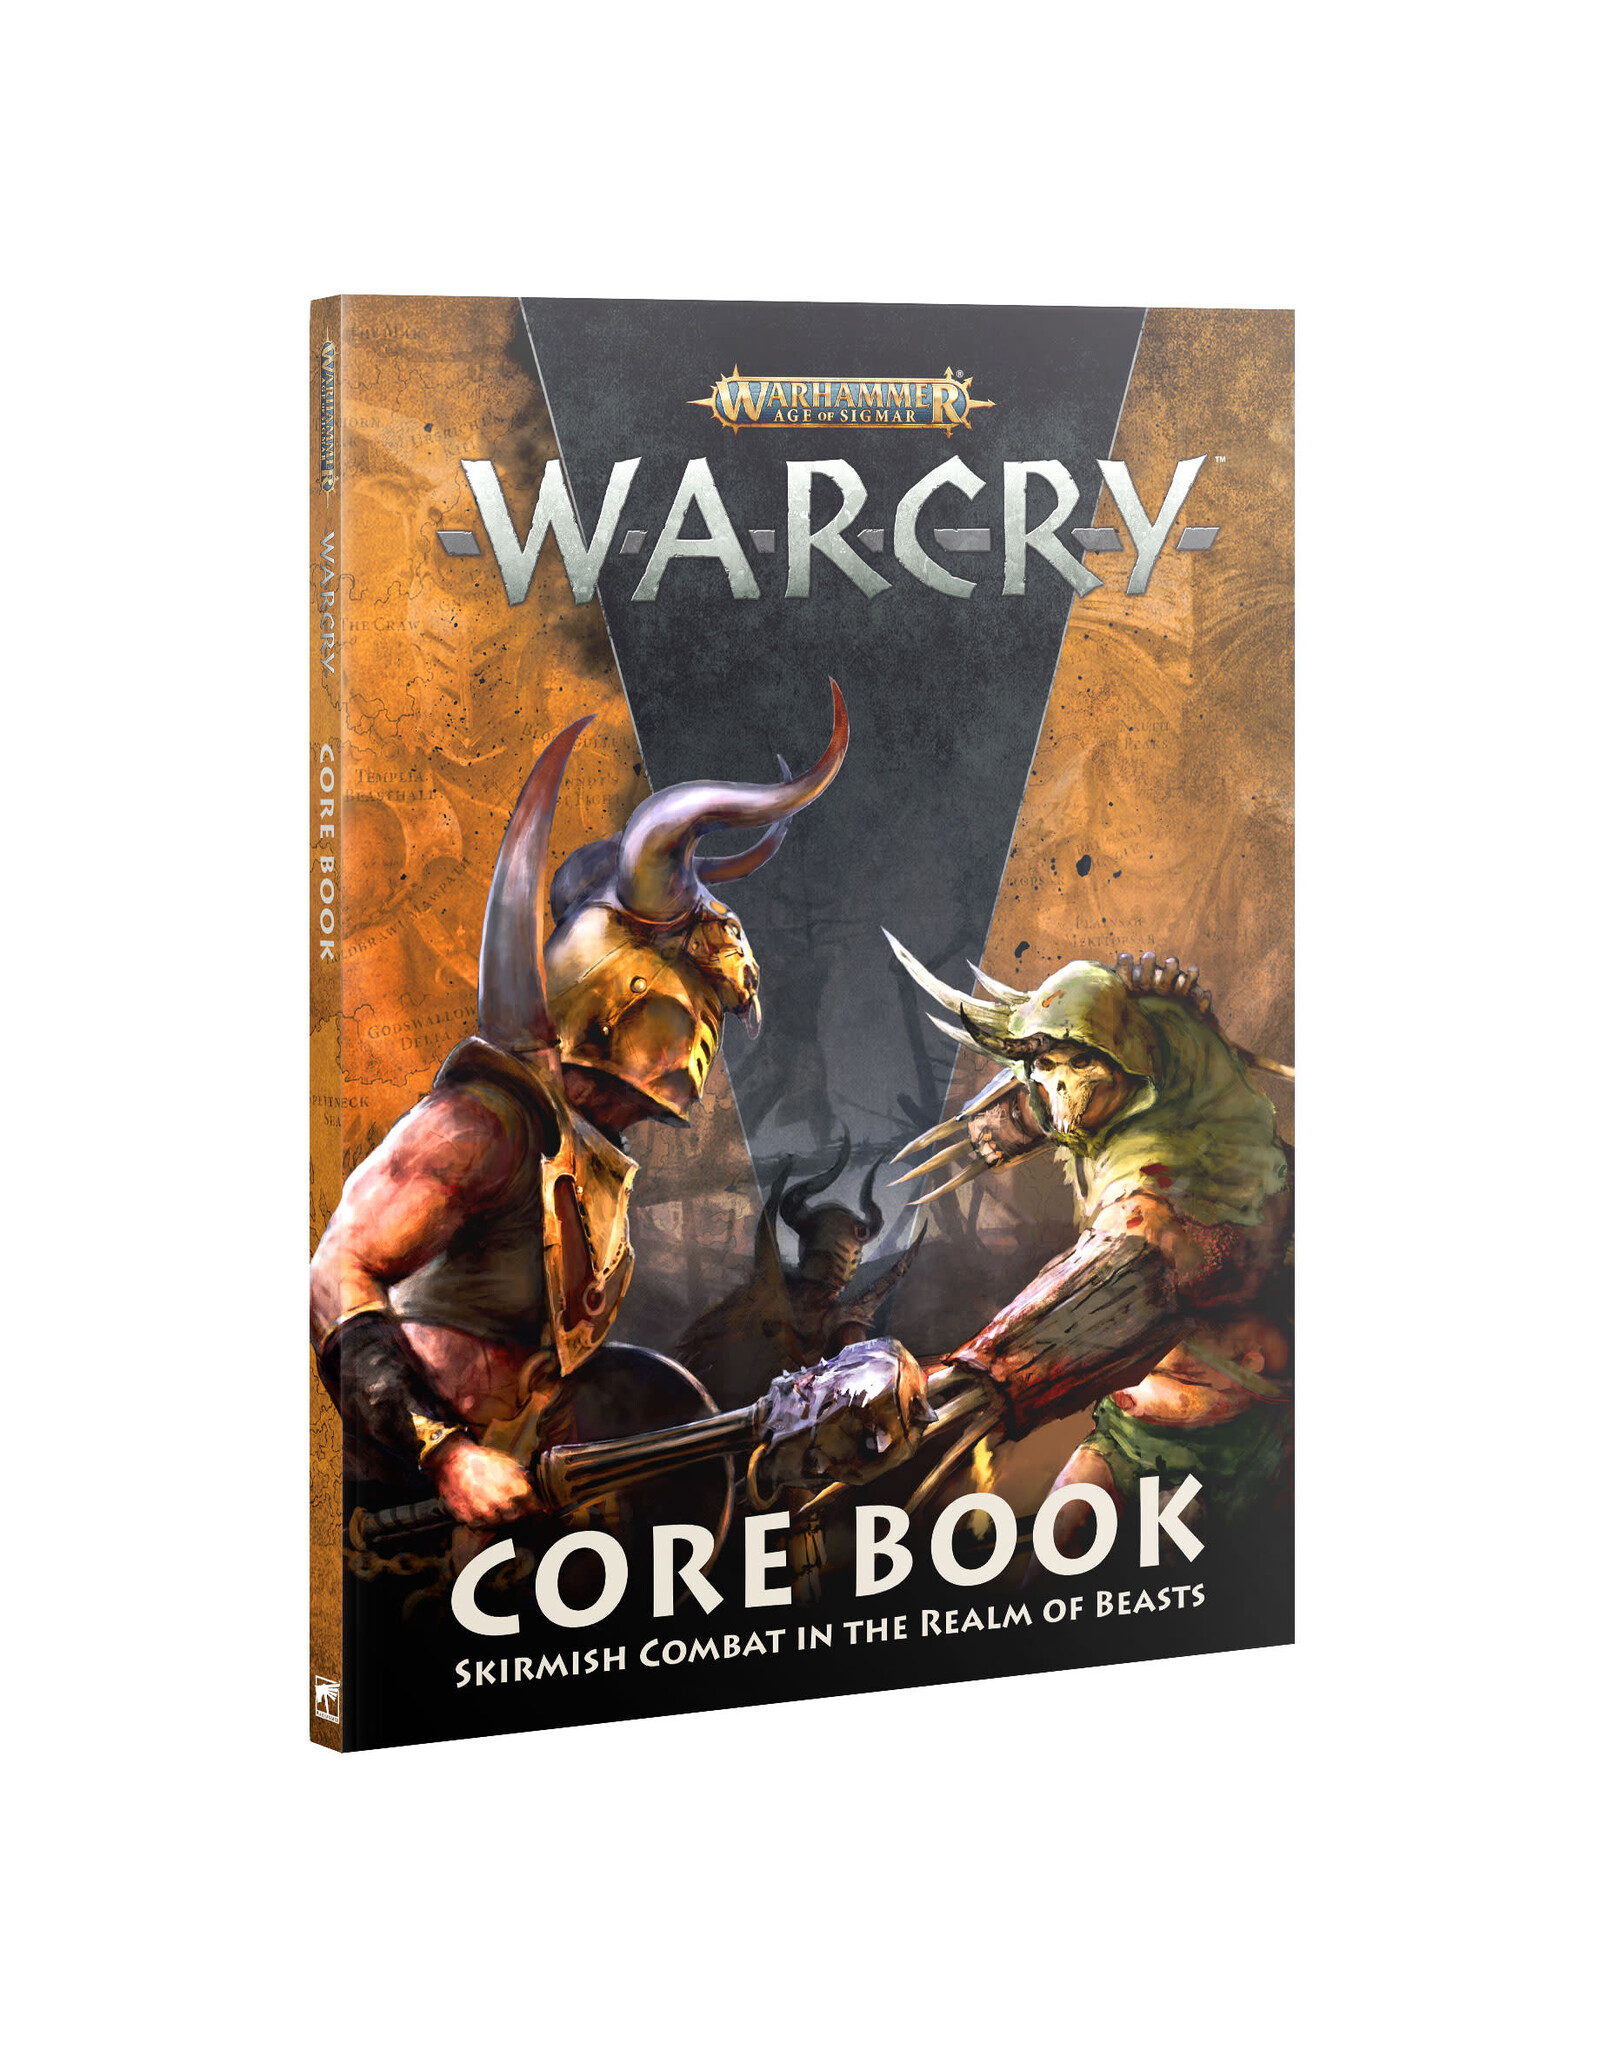 Games Workshop Warcry Core Book